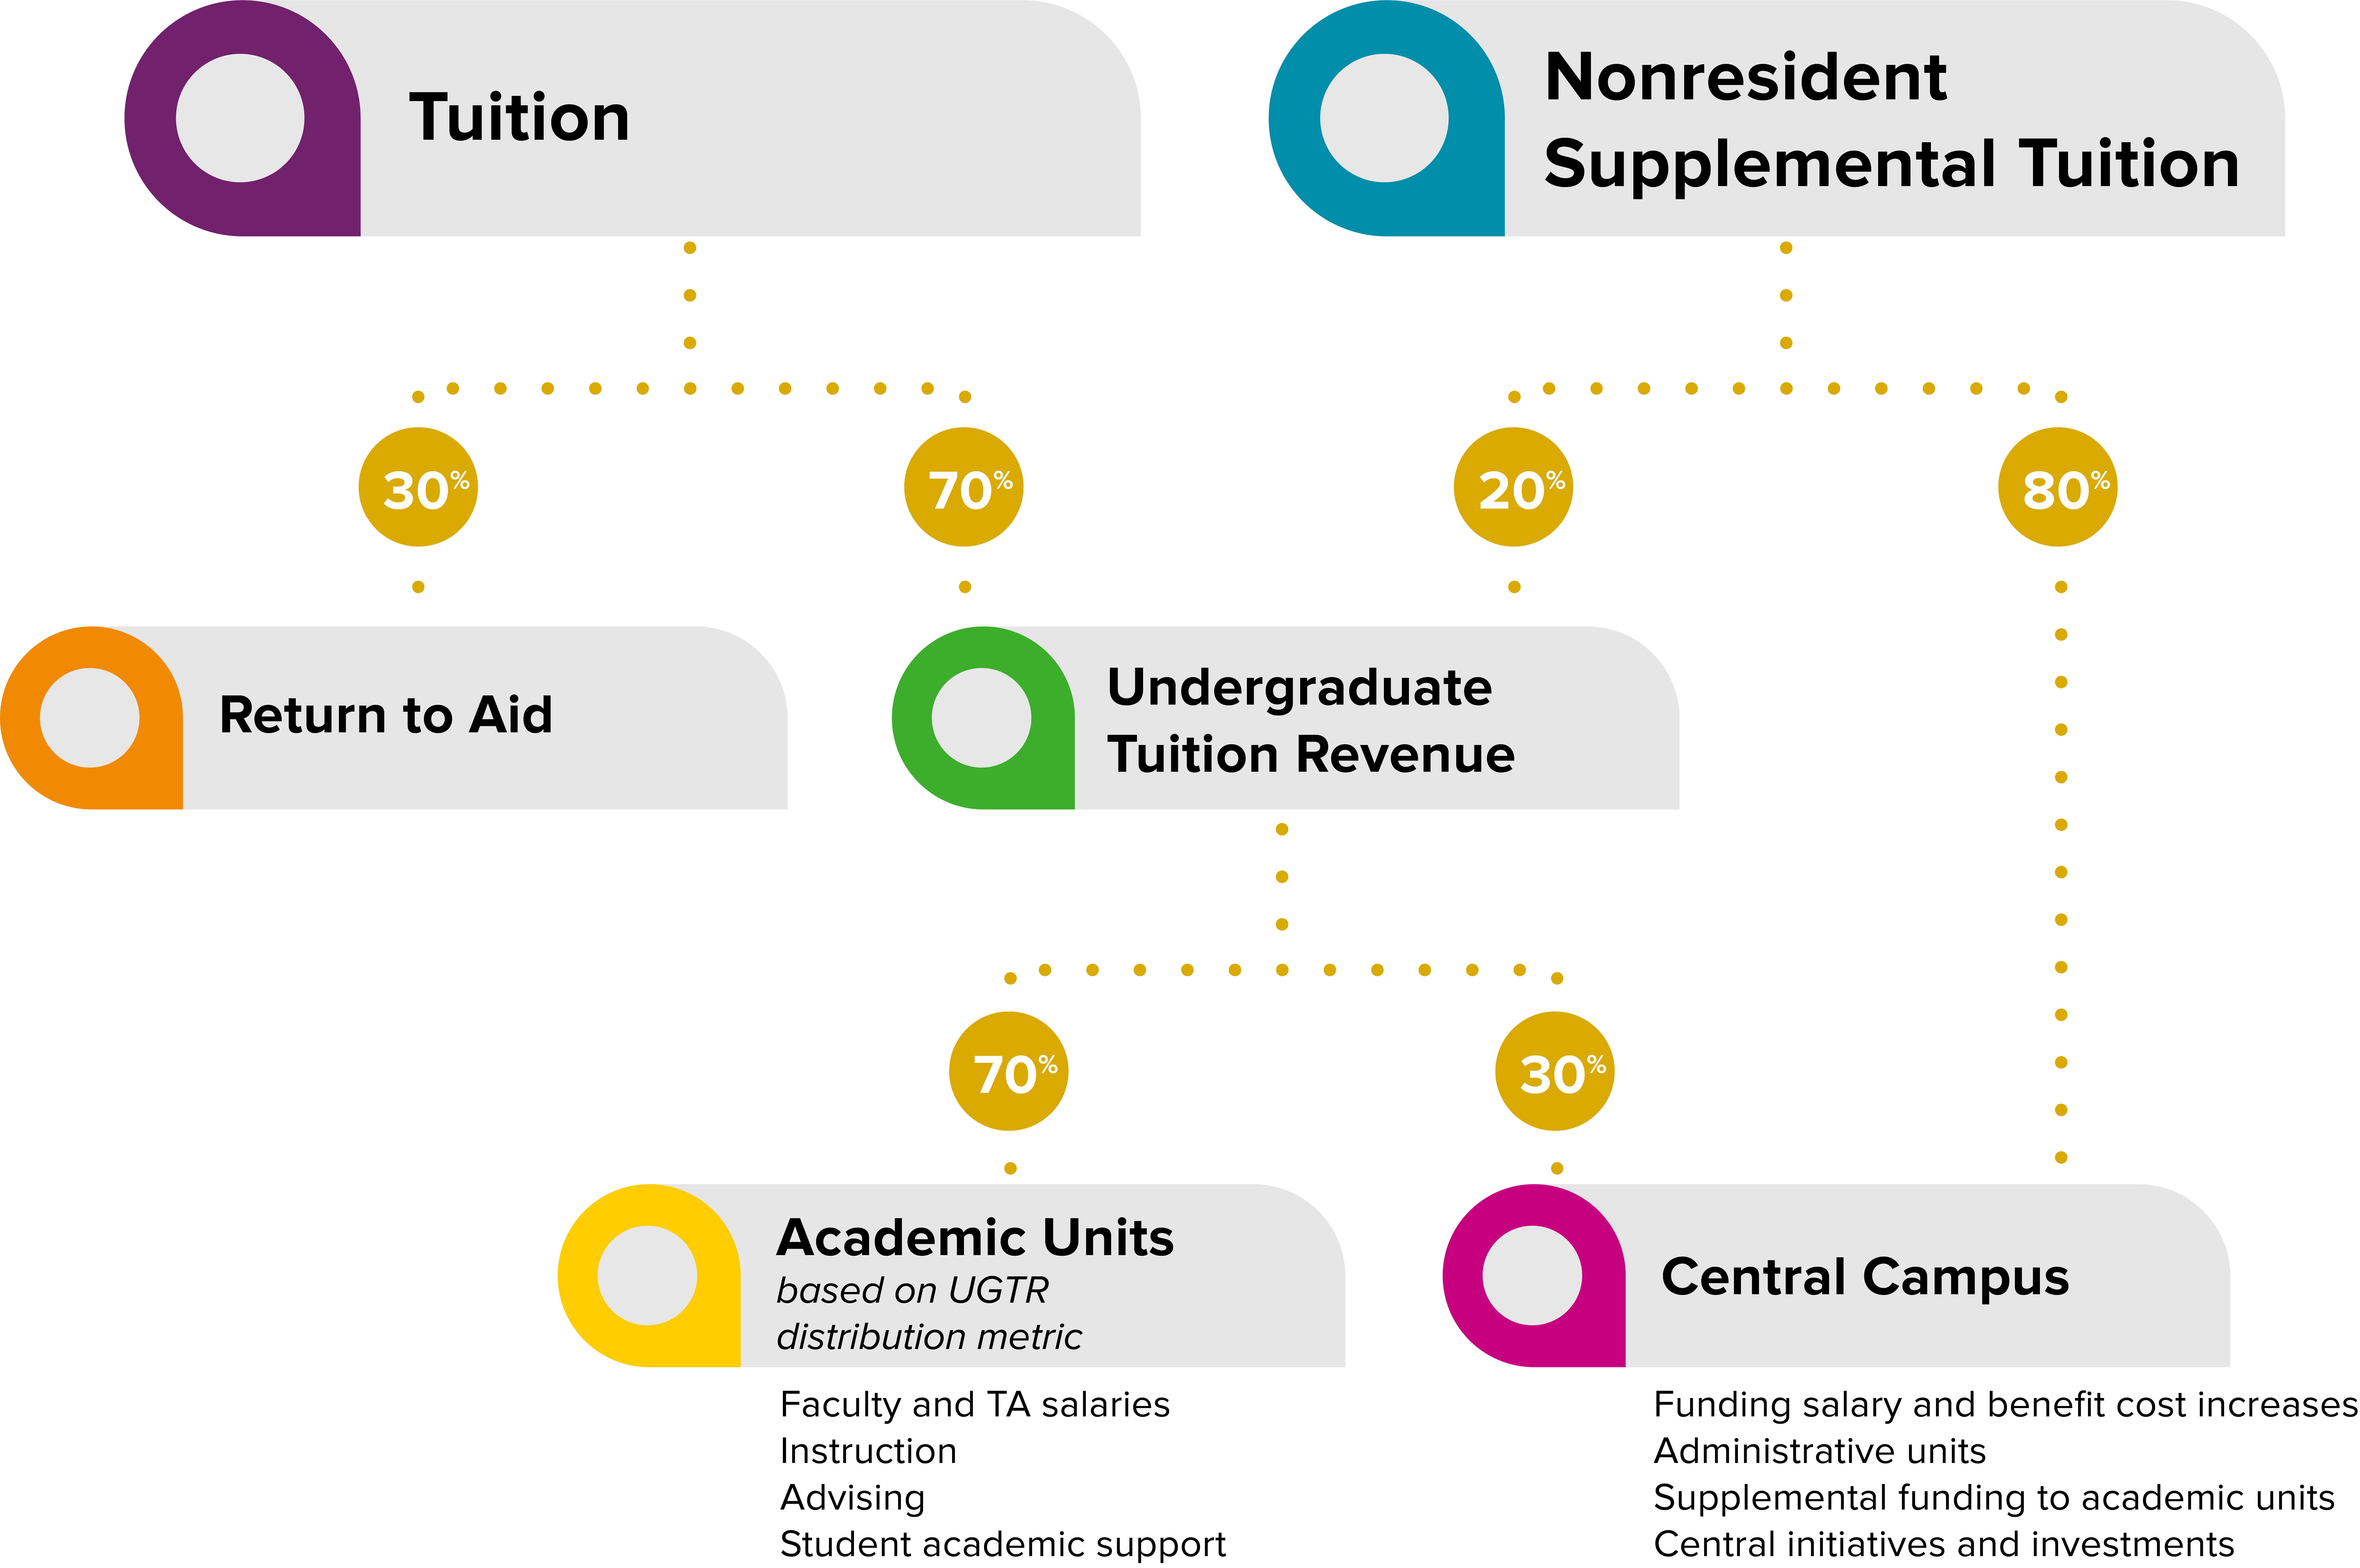 Diagram showing incentive-based budget model for undergraduate tuition, as described on the webpage